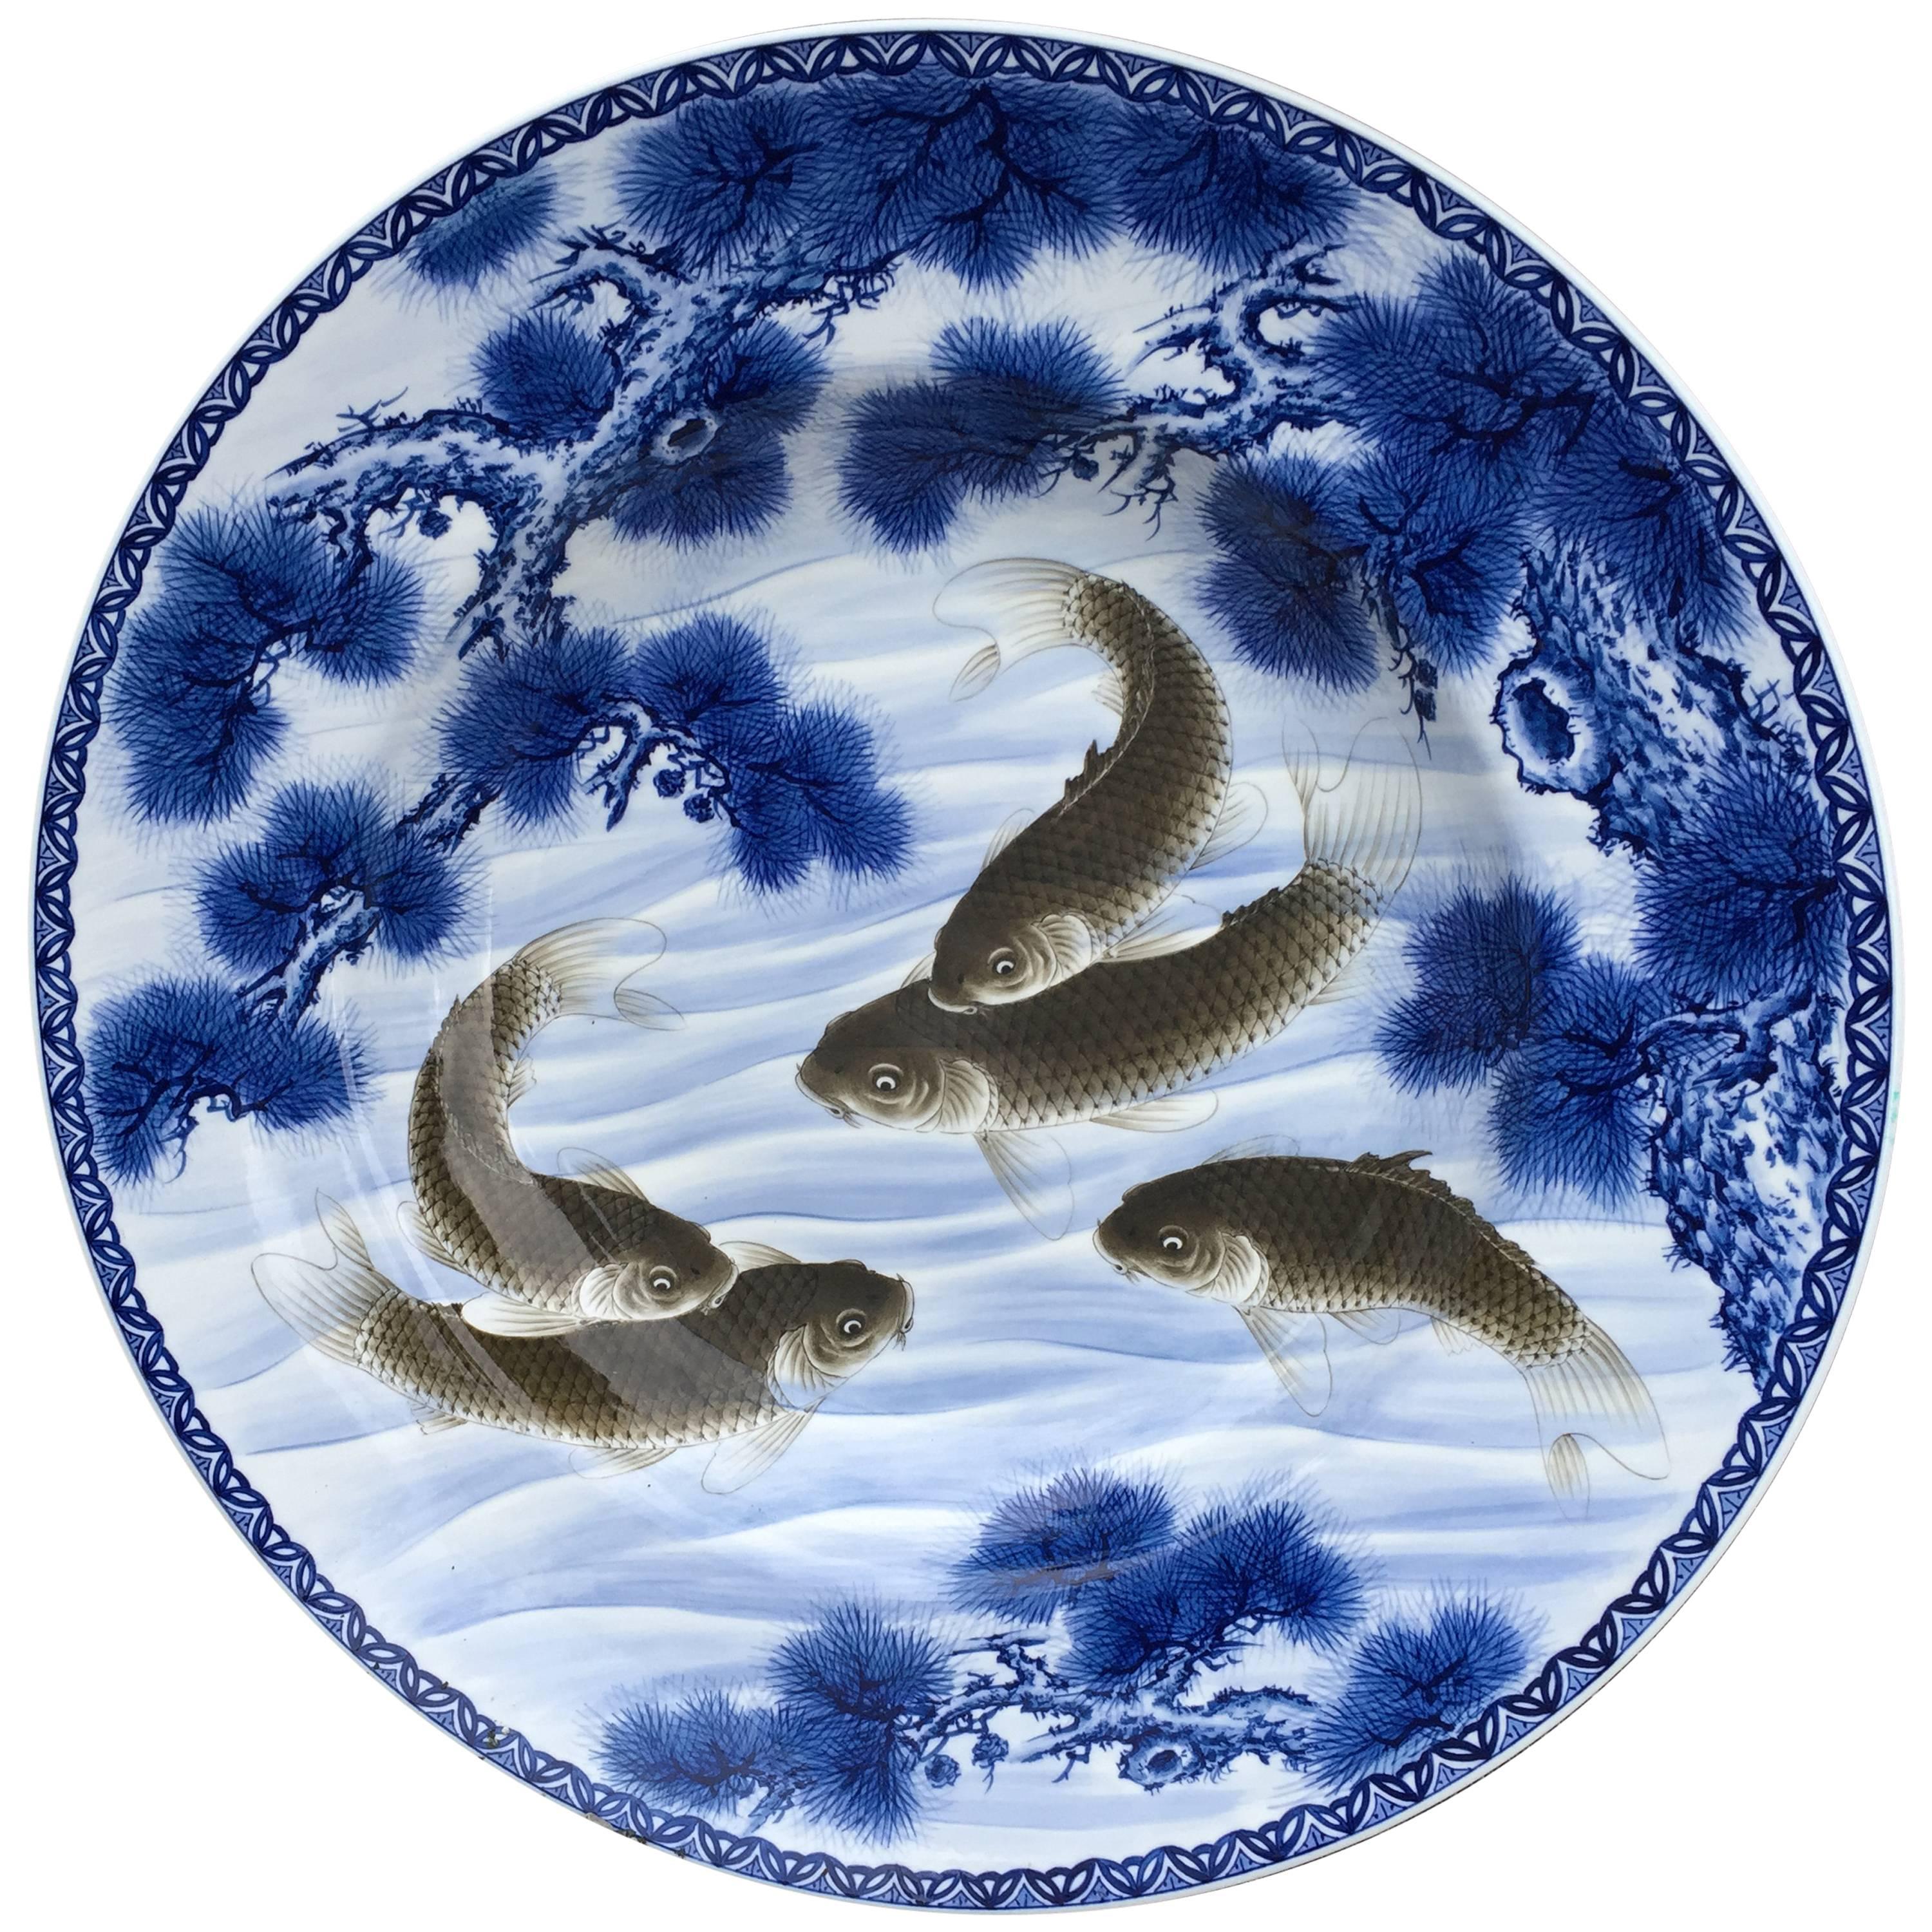 Japan Huge Ceramic "Swirling Koi" Hand-Painted Blue and White Bowl